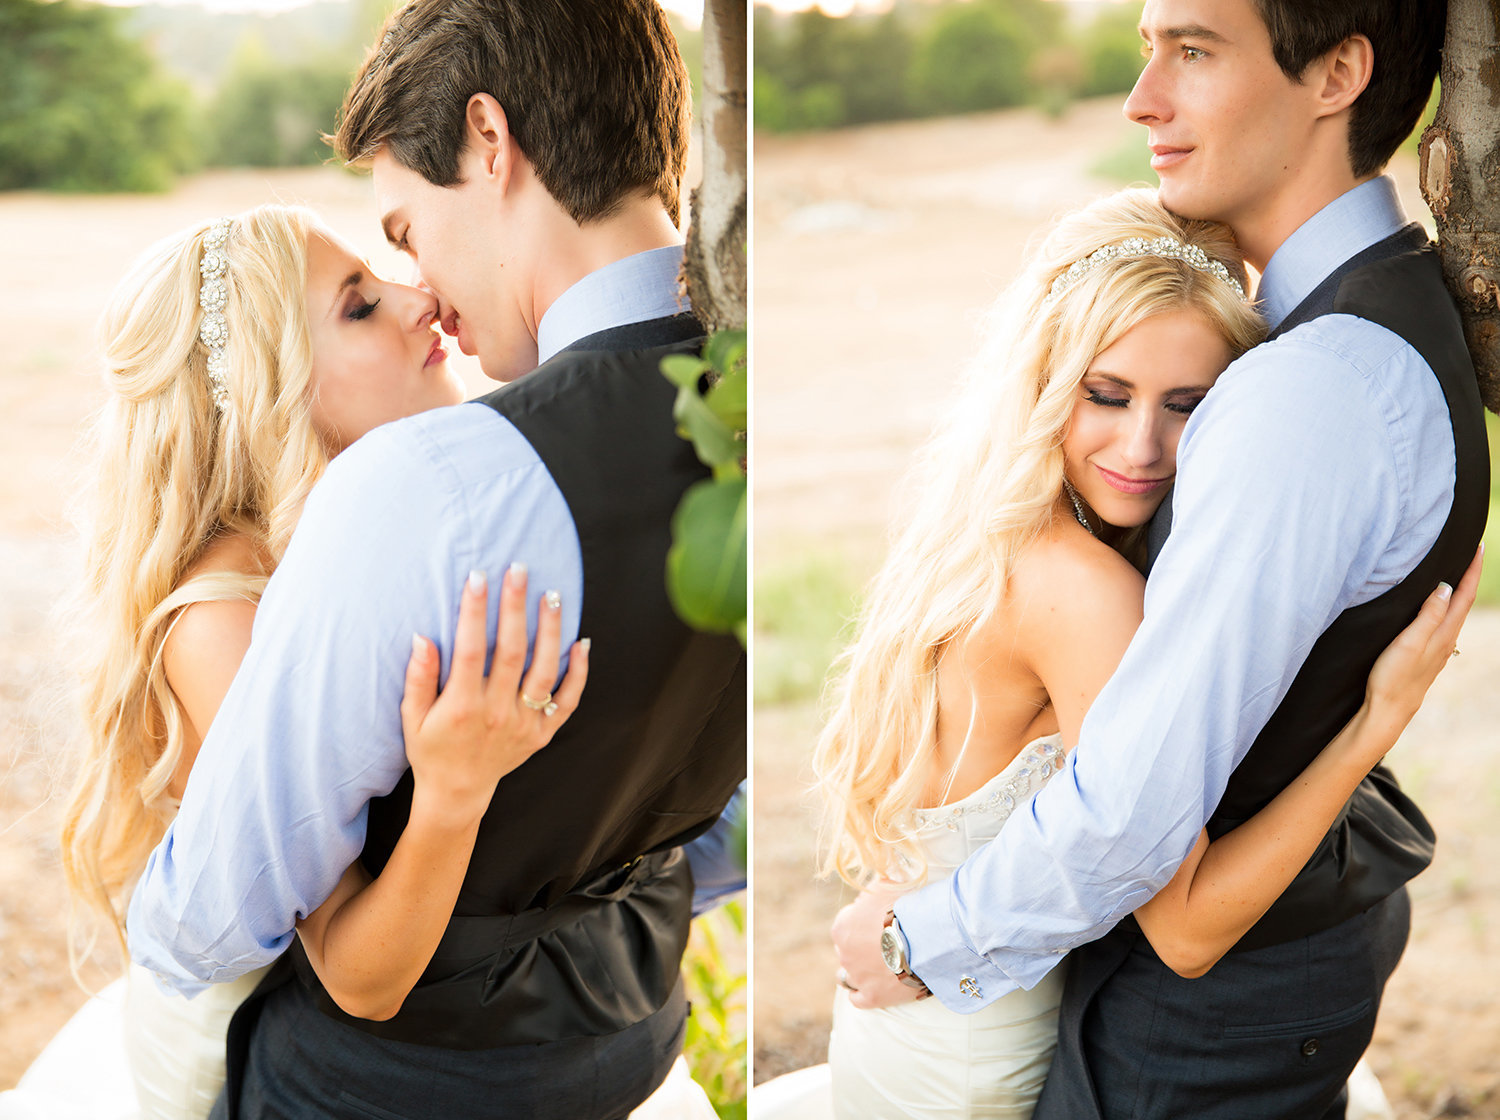 Creative posing ideas for brides and grooms